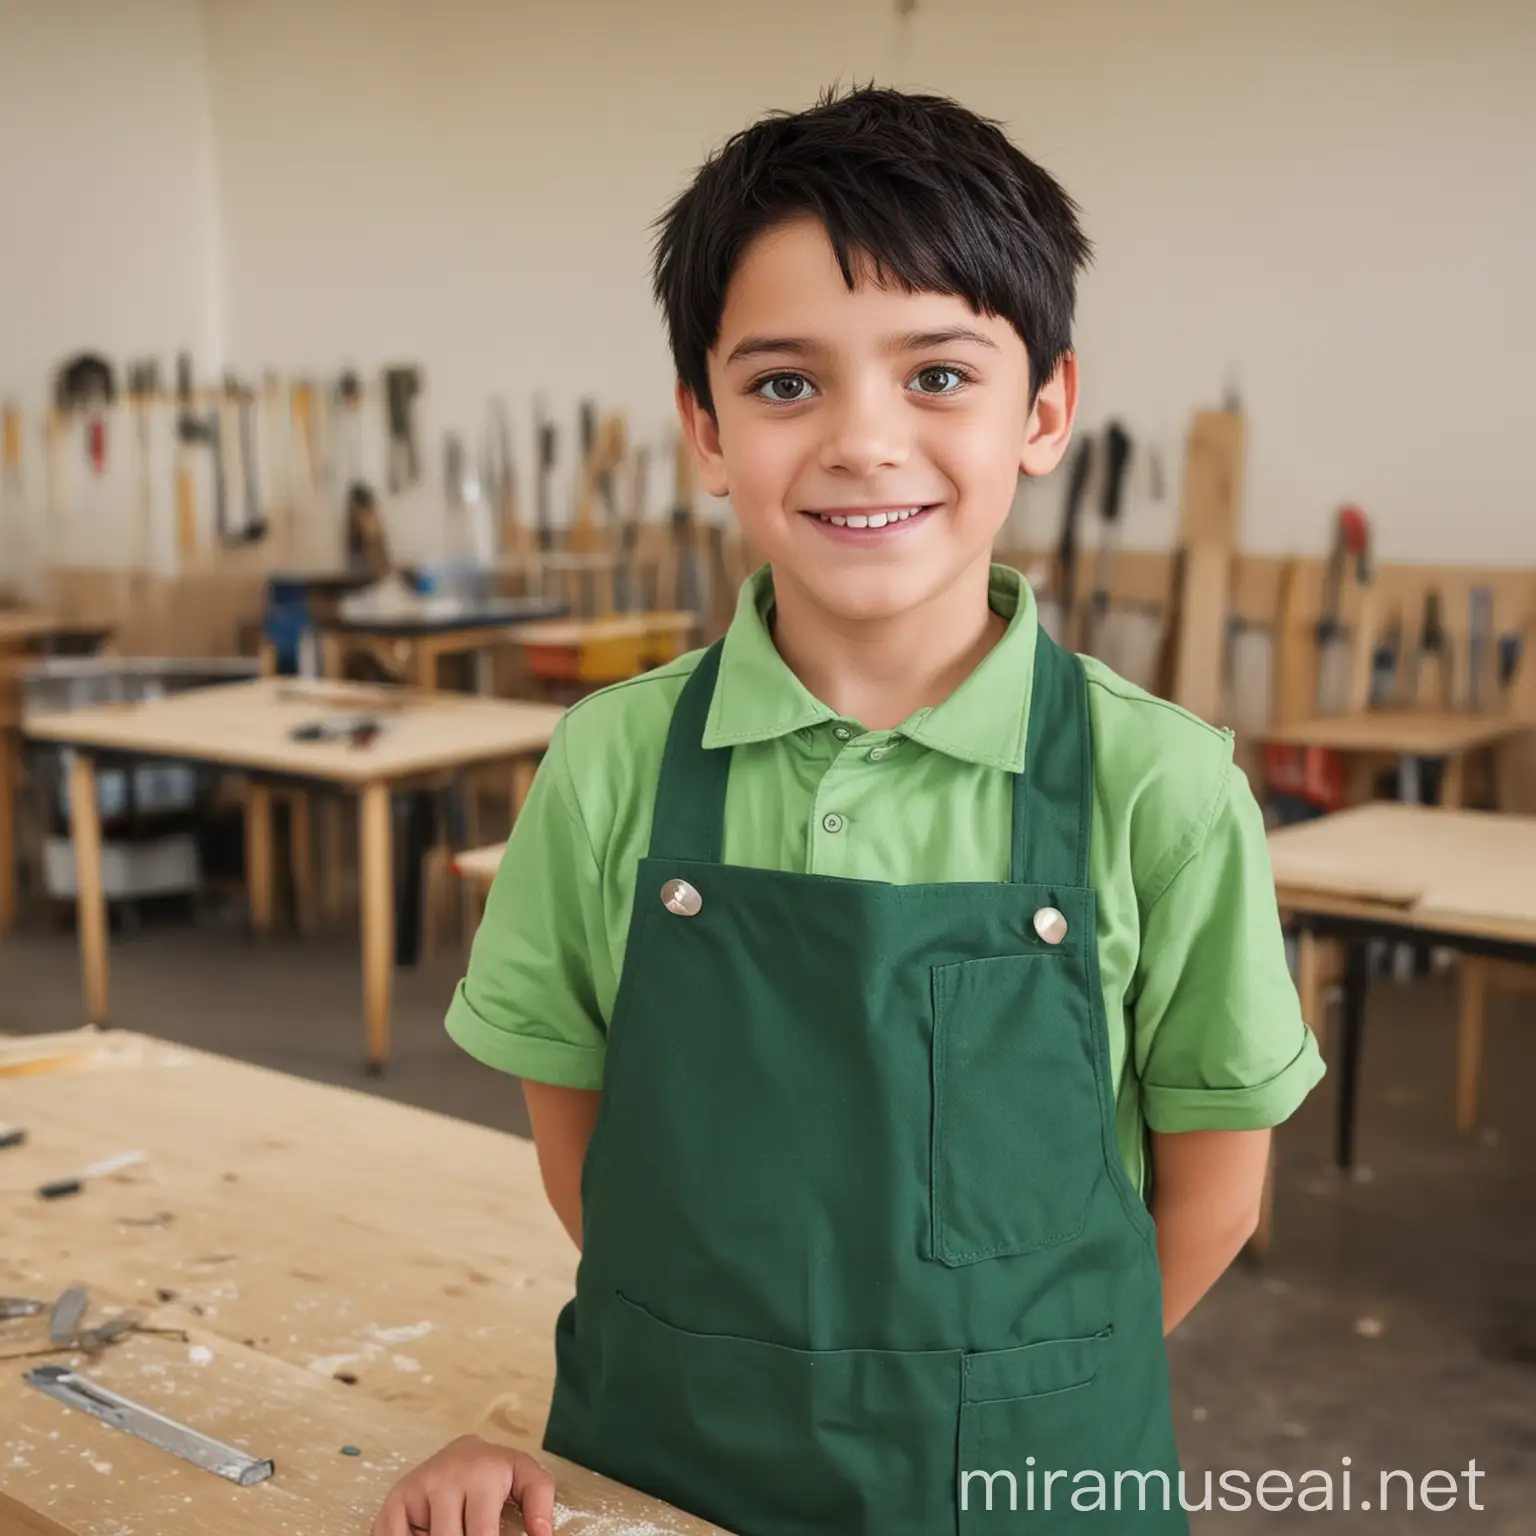 Smiling Boy in Green Carpentry Apron Doing Classroom Carpentry